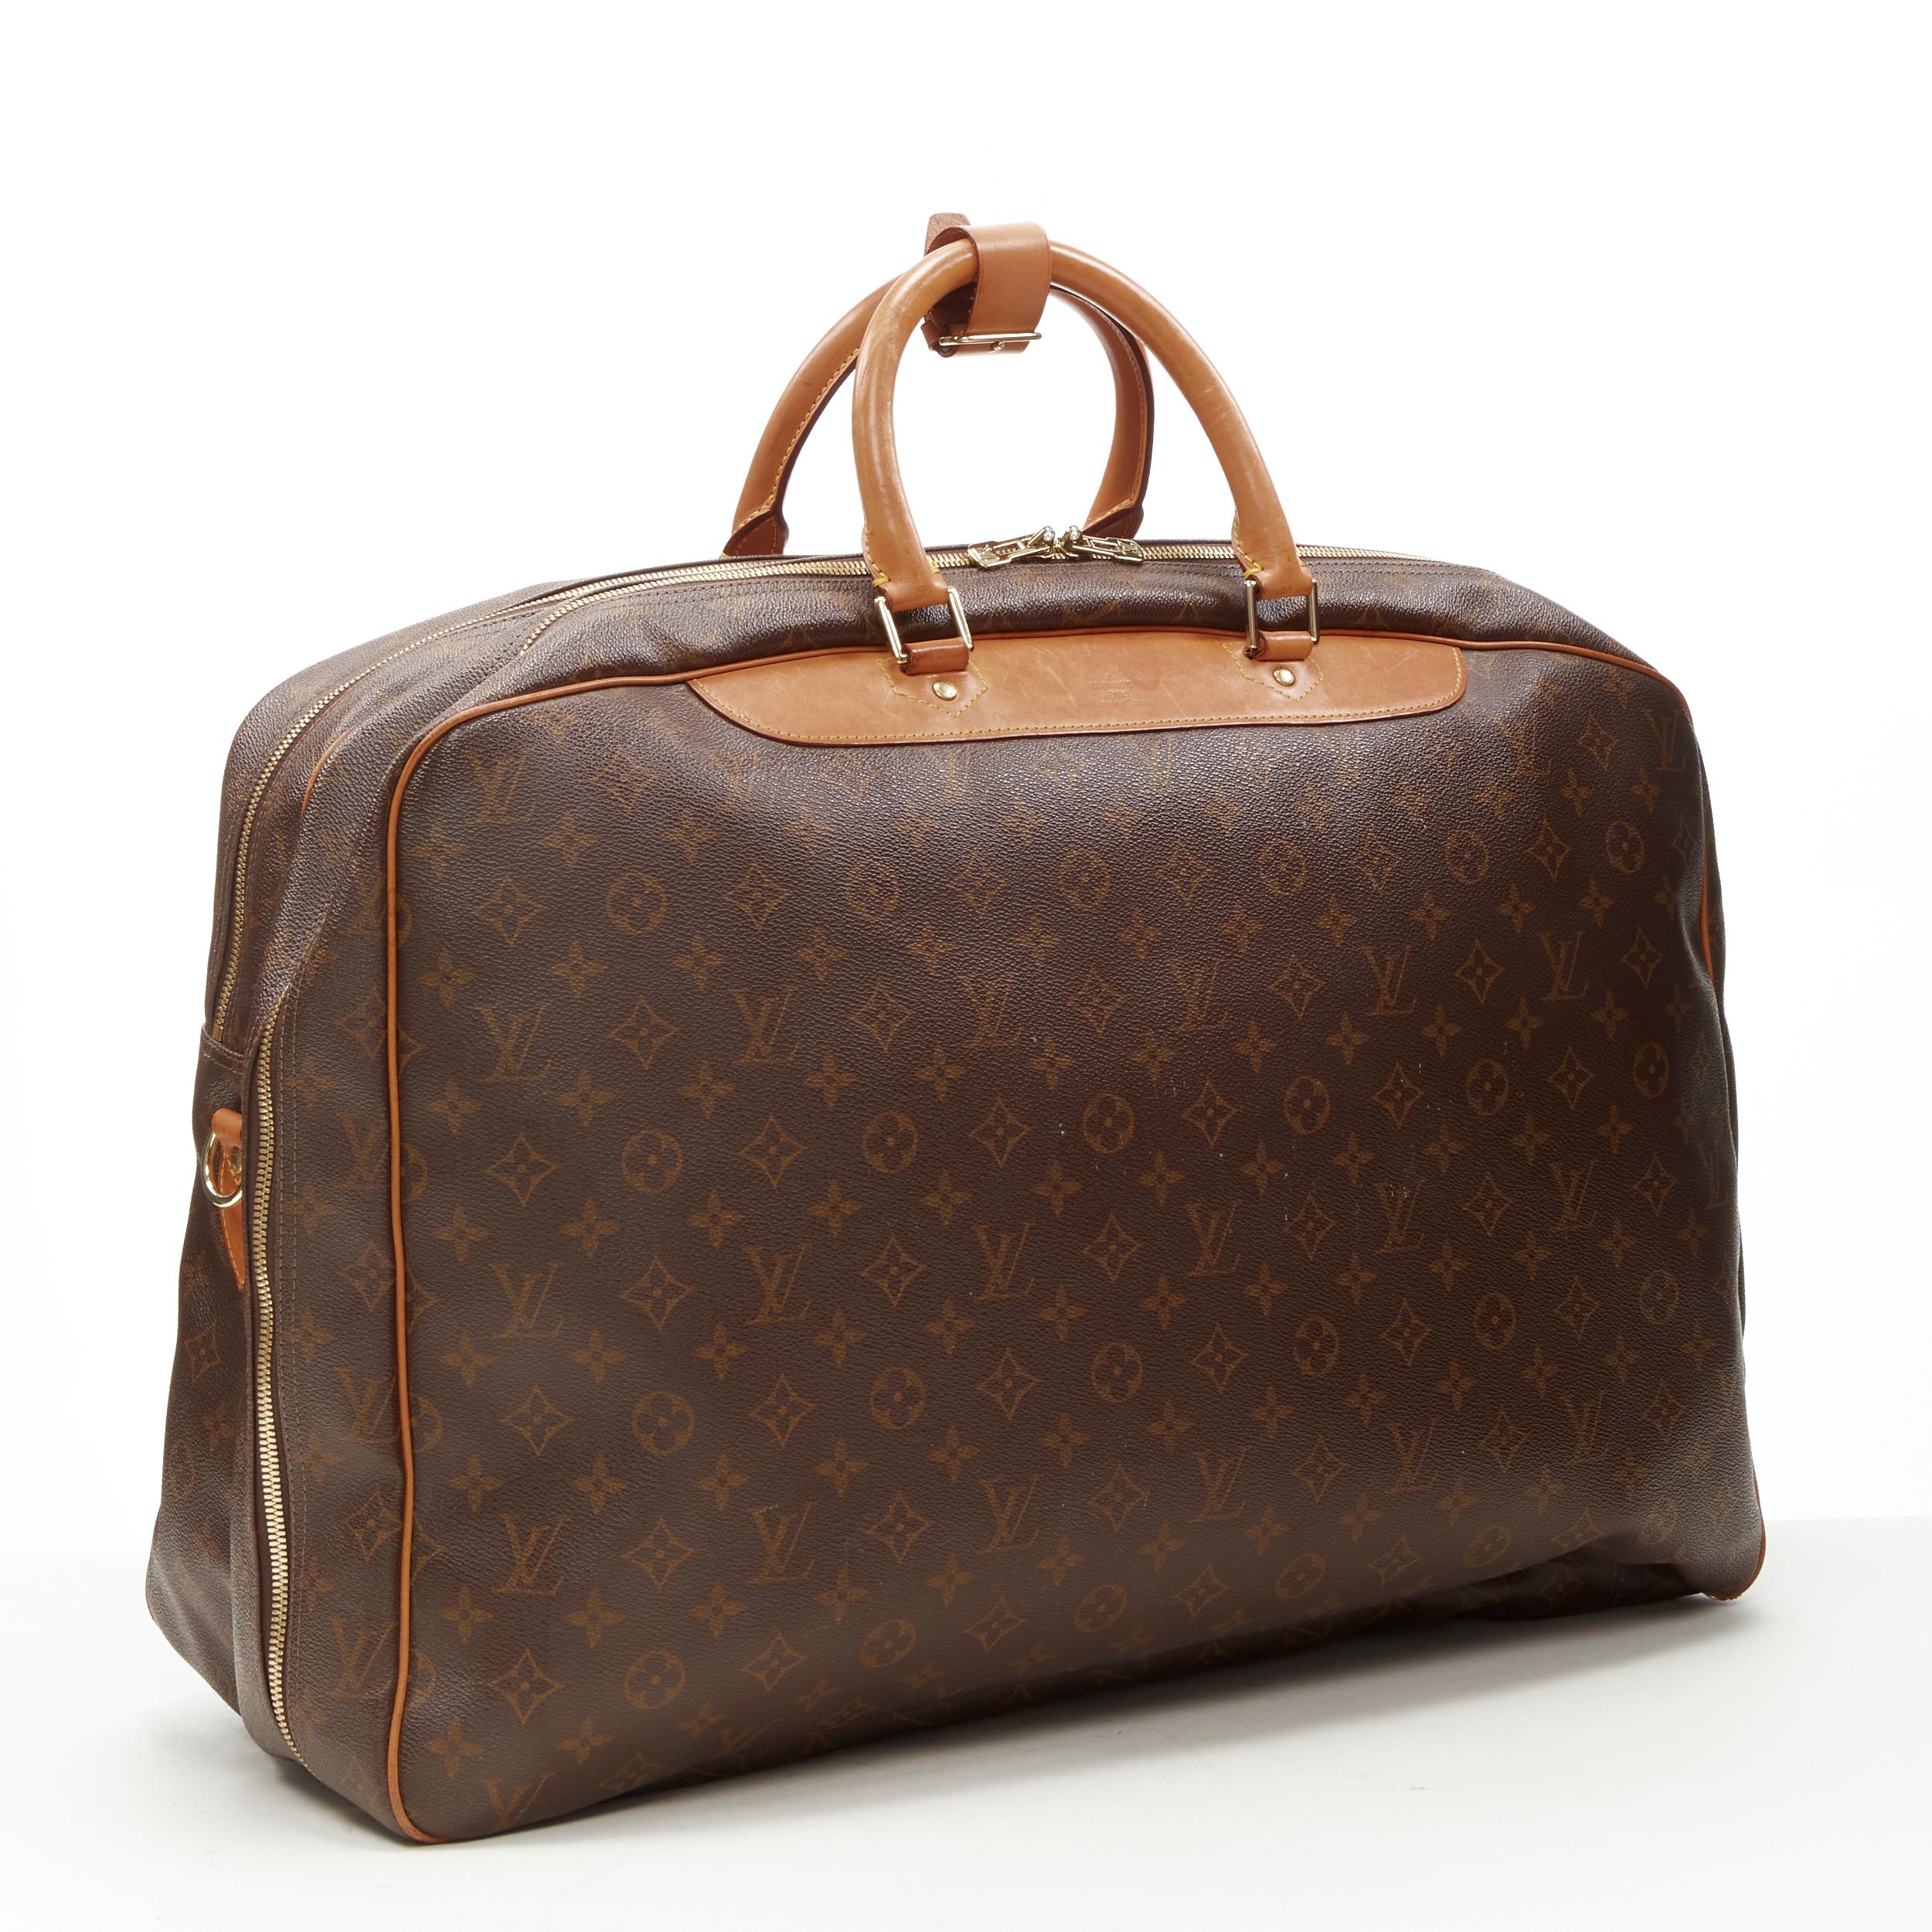 LOUIS VUITTON VIntage Alize brown monogram leather 2 compartment bag garment bag 
Reference: AEMA/A00079 
Brand: Louis Vuitton 
Model: Alize 
Material: Canvas 
Color: Brown 
Pattern: Solid 
Closure: Zip 
Extra Detail: Alize 2 compartment weekender